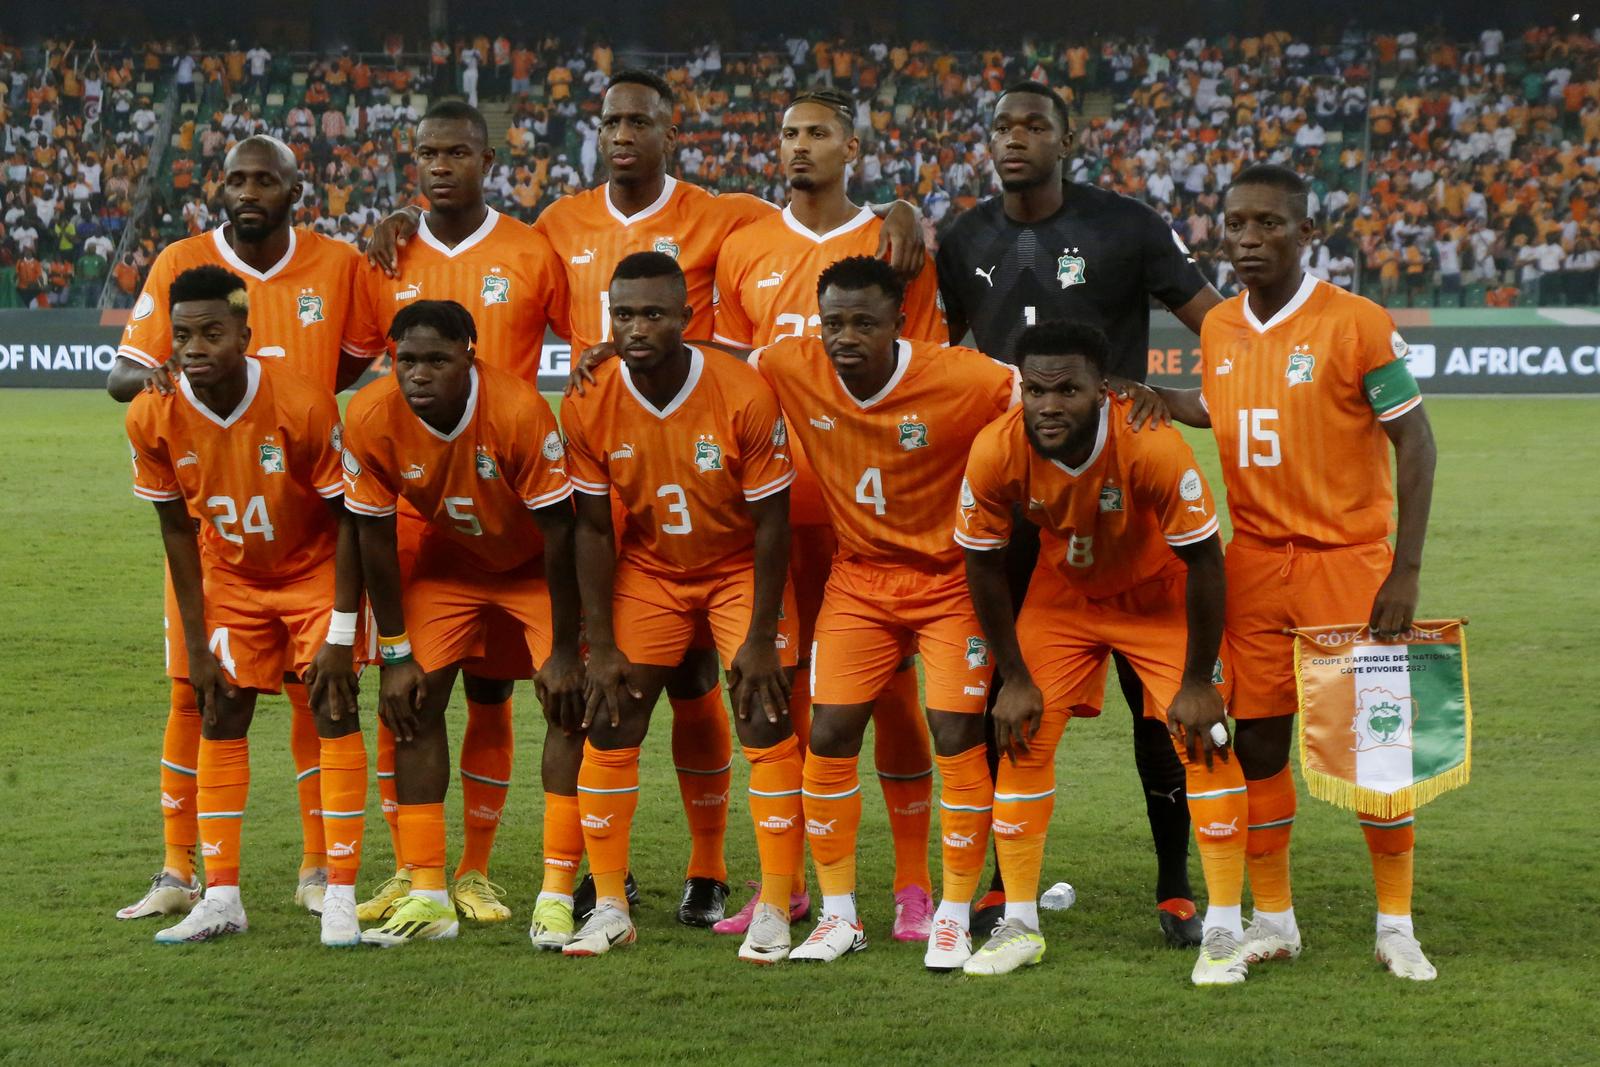 Soccer Football - Africa Cup of Nations - Semi Final - Ivory Coast v DR Congo - Stade Olympique Alassane Ouattara, Abidjan, Ivory Coast - February 7, 2024 Ivory Coast players pose for a team group photo before the match REUTERS/Luc Gnago Photo: LUC GNAGO/REUTERS